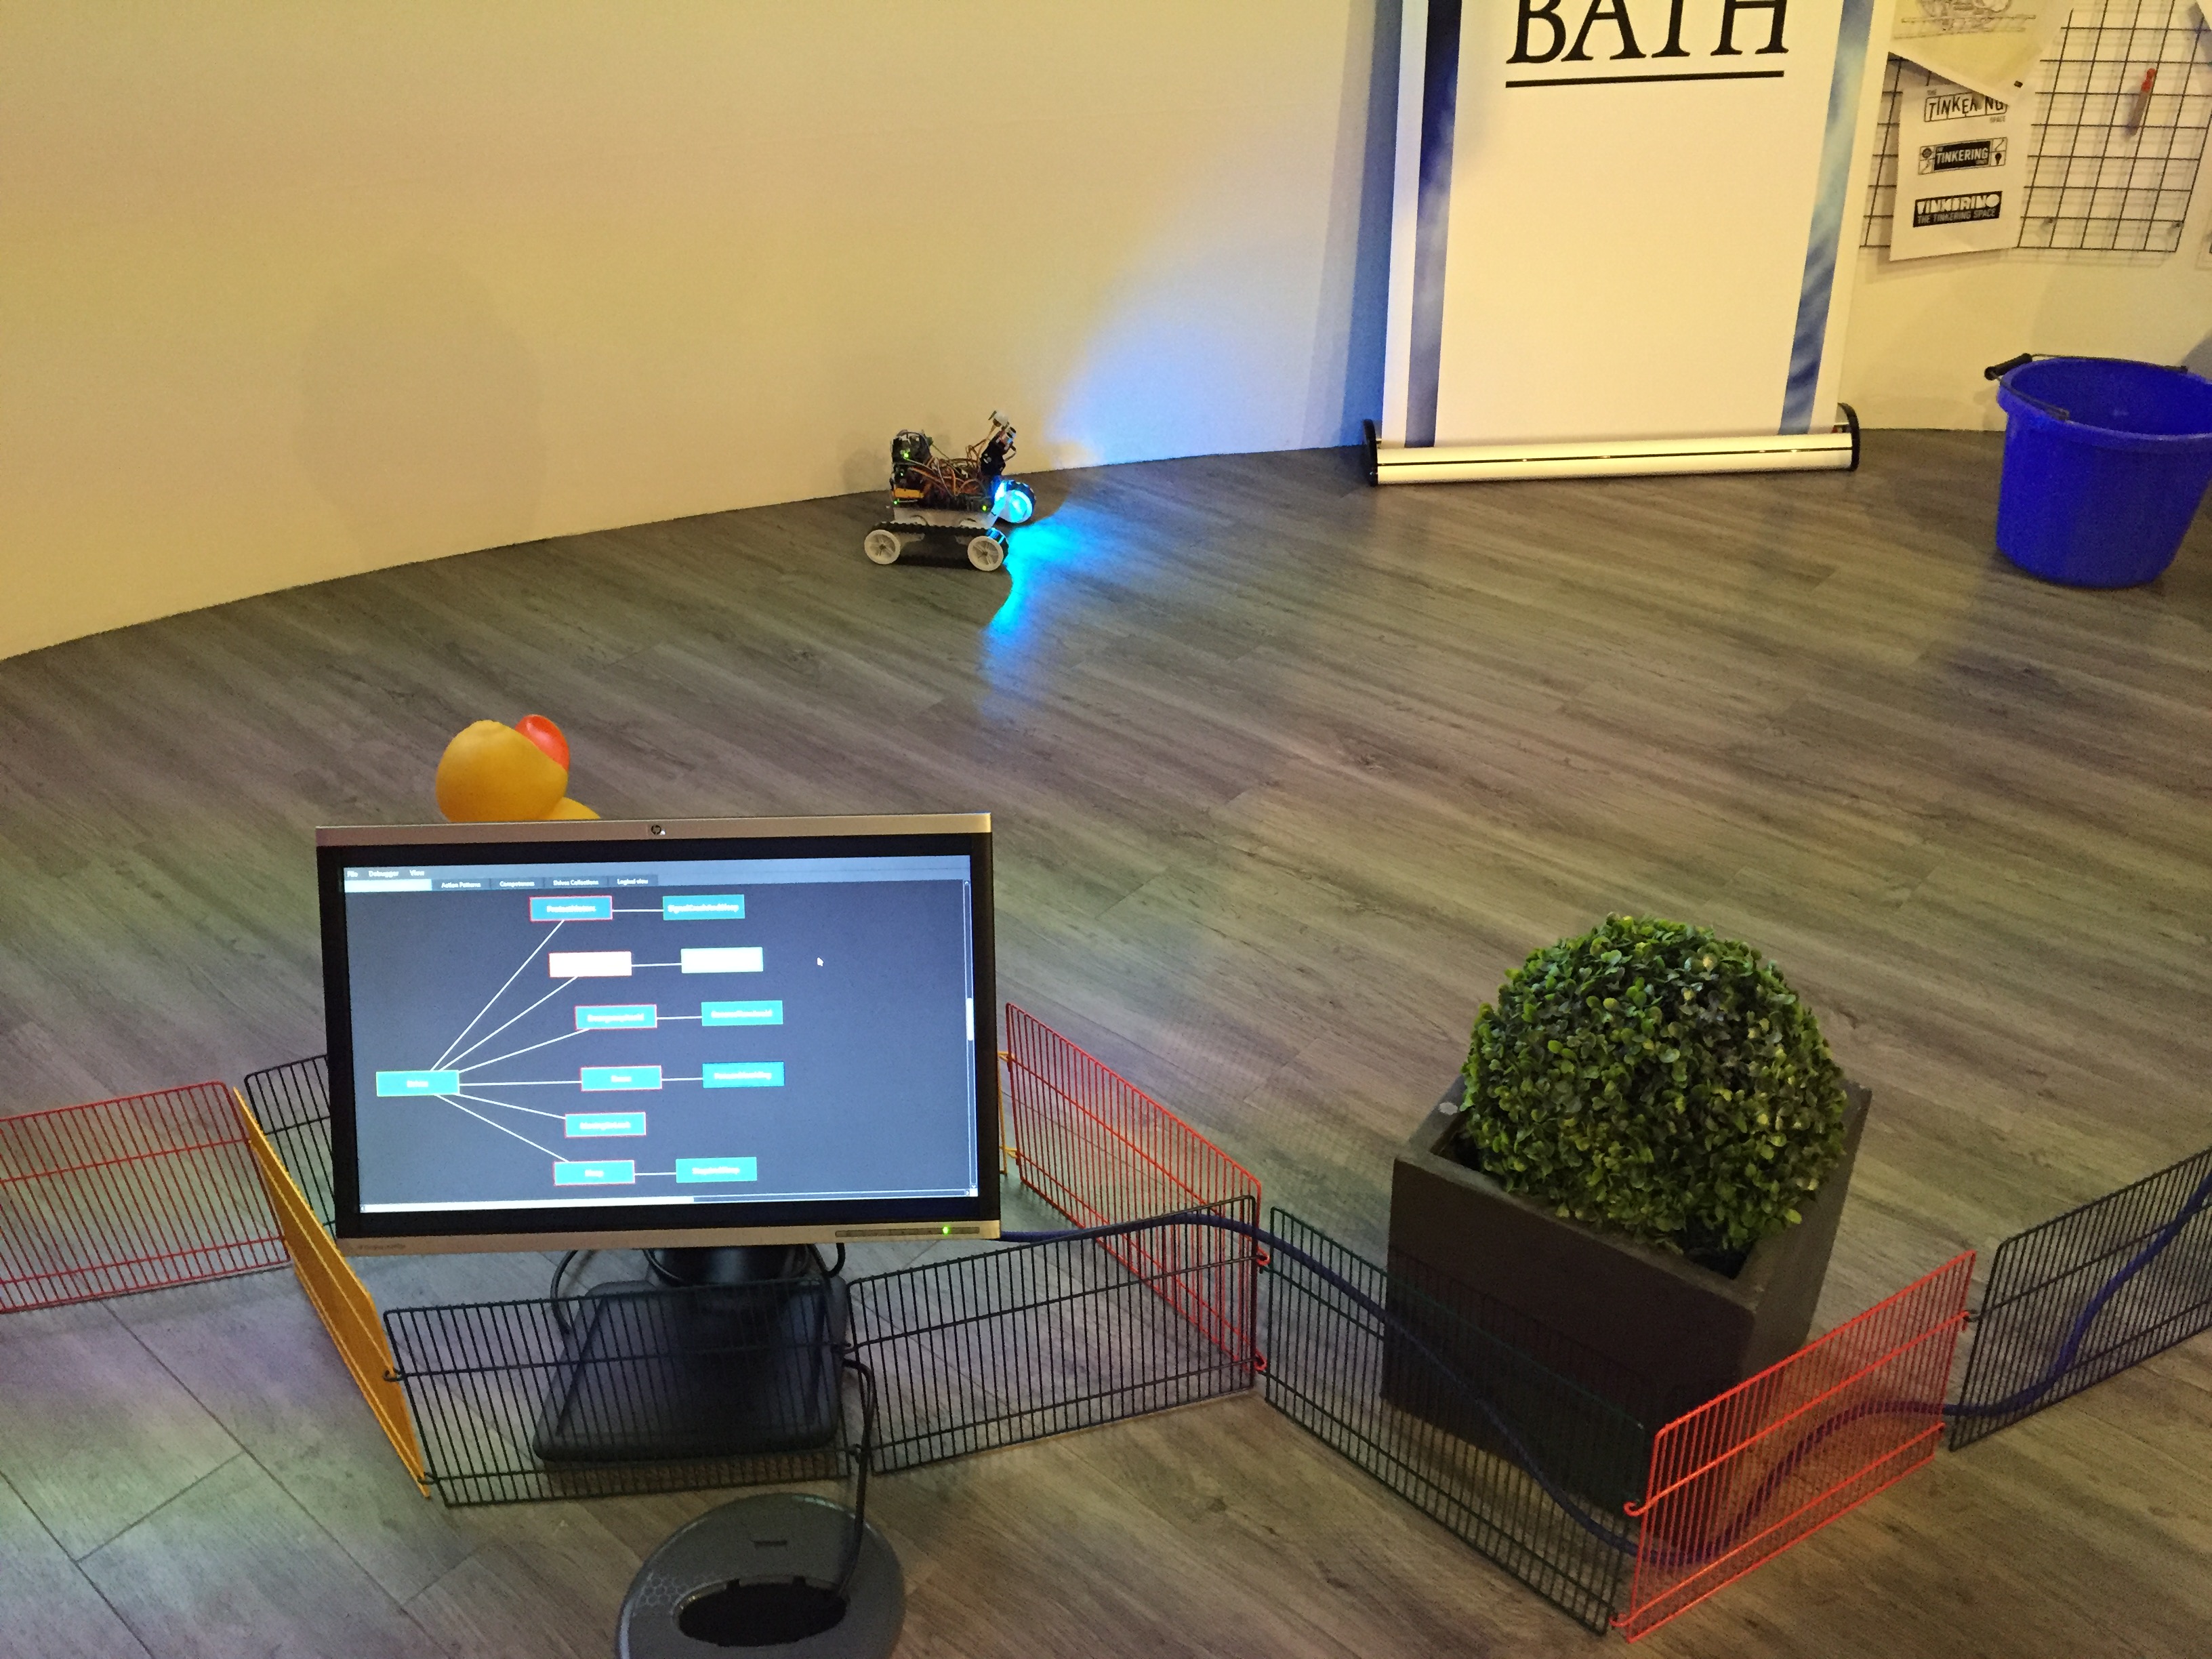 Scene with R5 robot in an enclosure with other objects